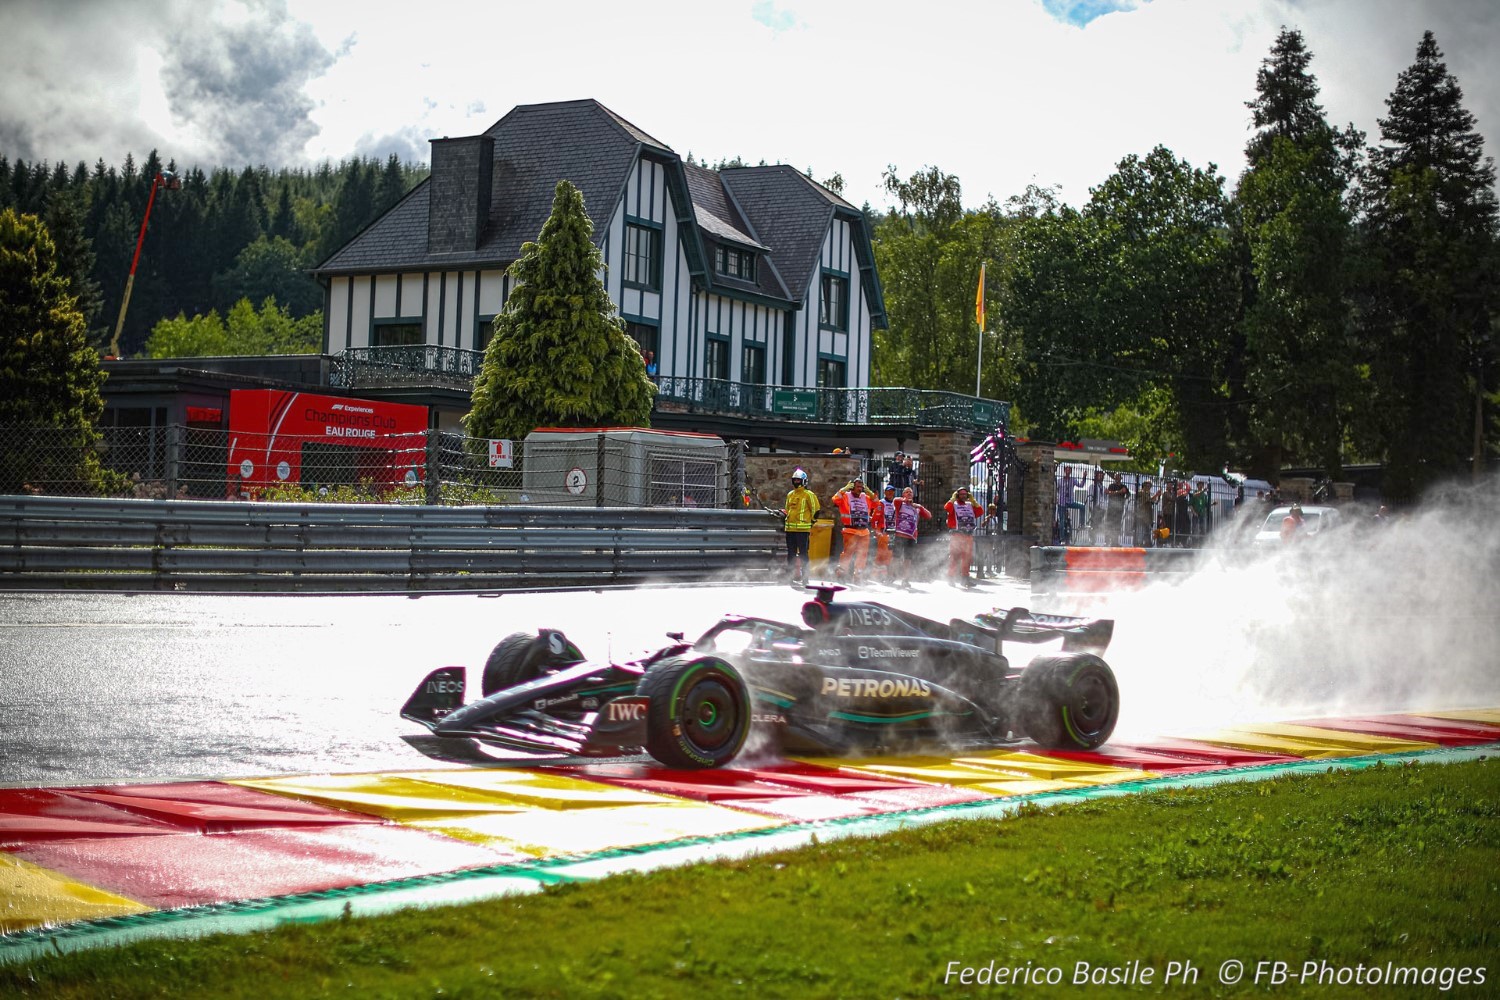 #63 George Russell, (GRB) AMG Mercedes Ineos during the Belgian GP, Spa-Francorchamps 27-30 July 2023 Formula 1 World championship 2023.